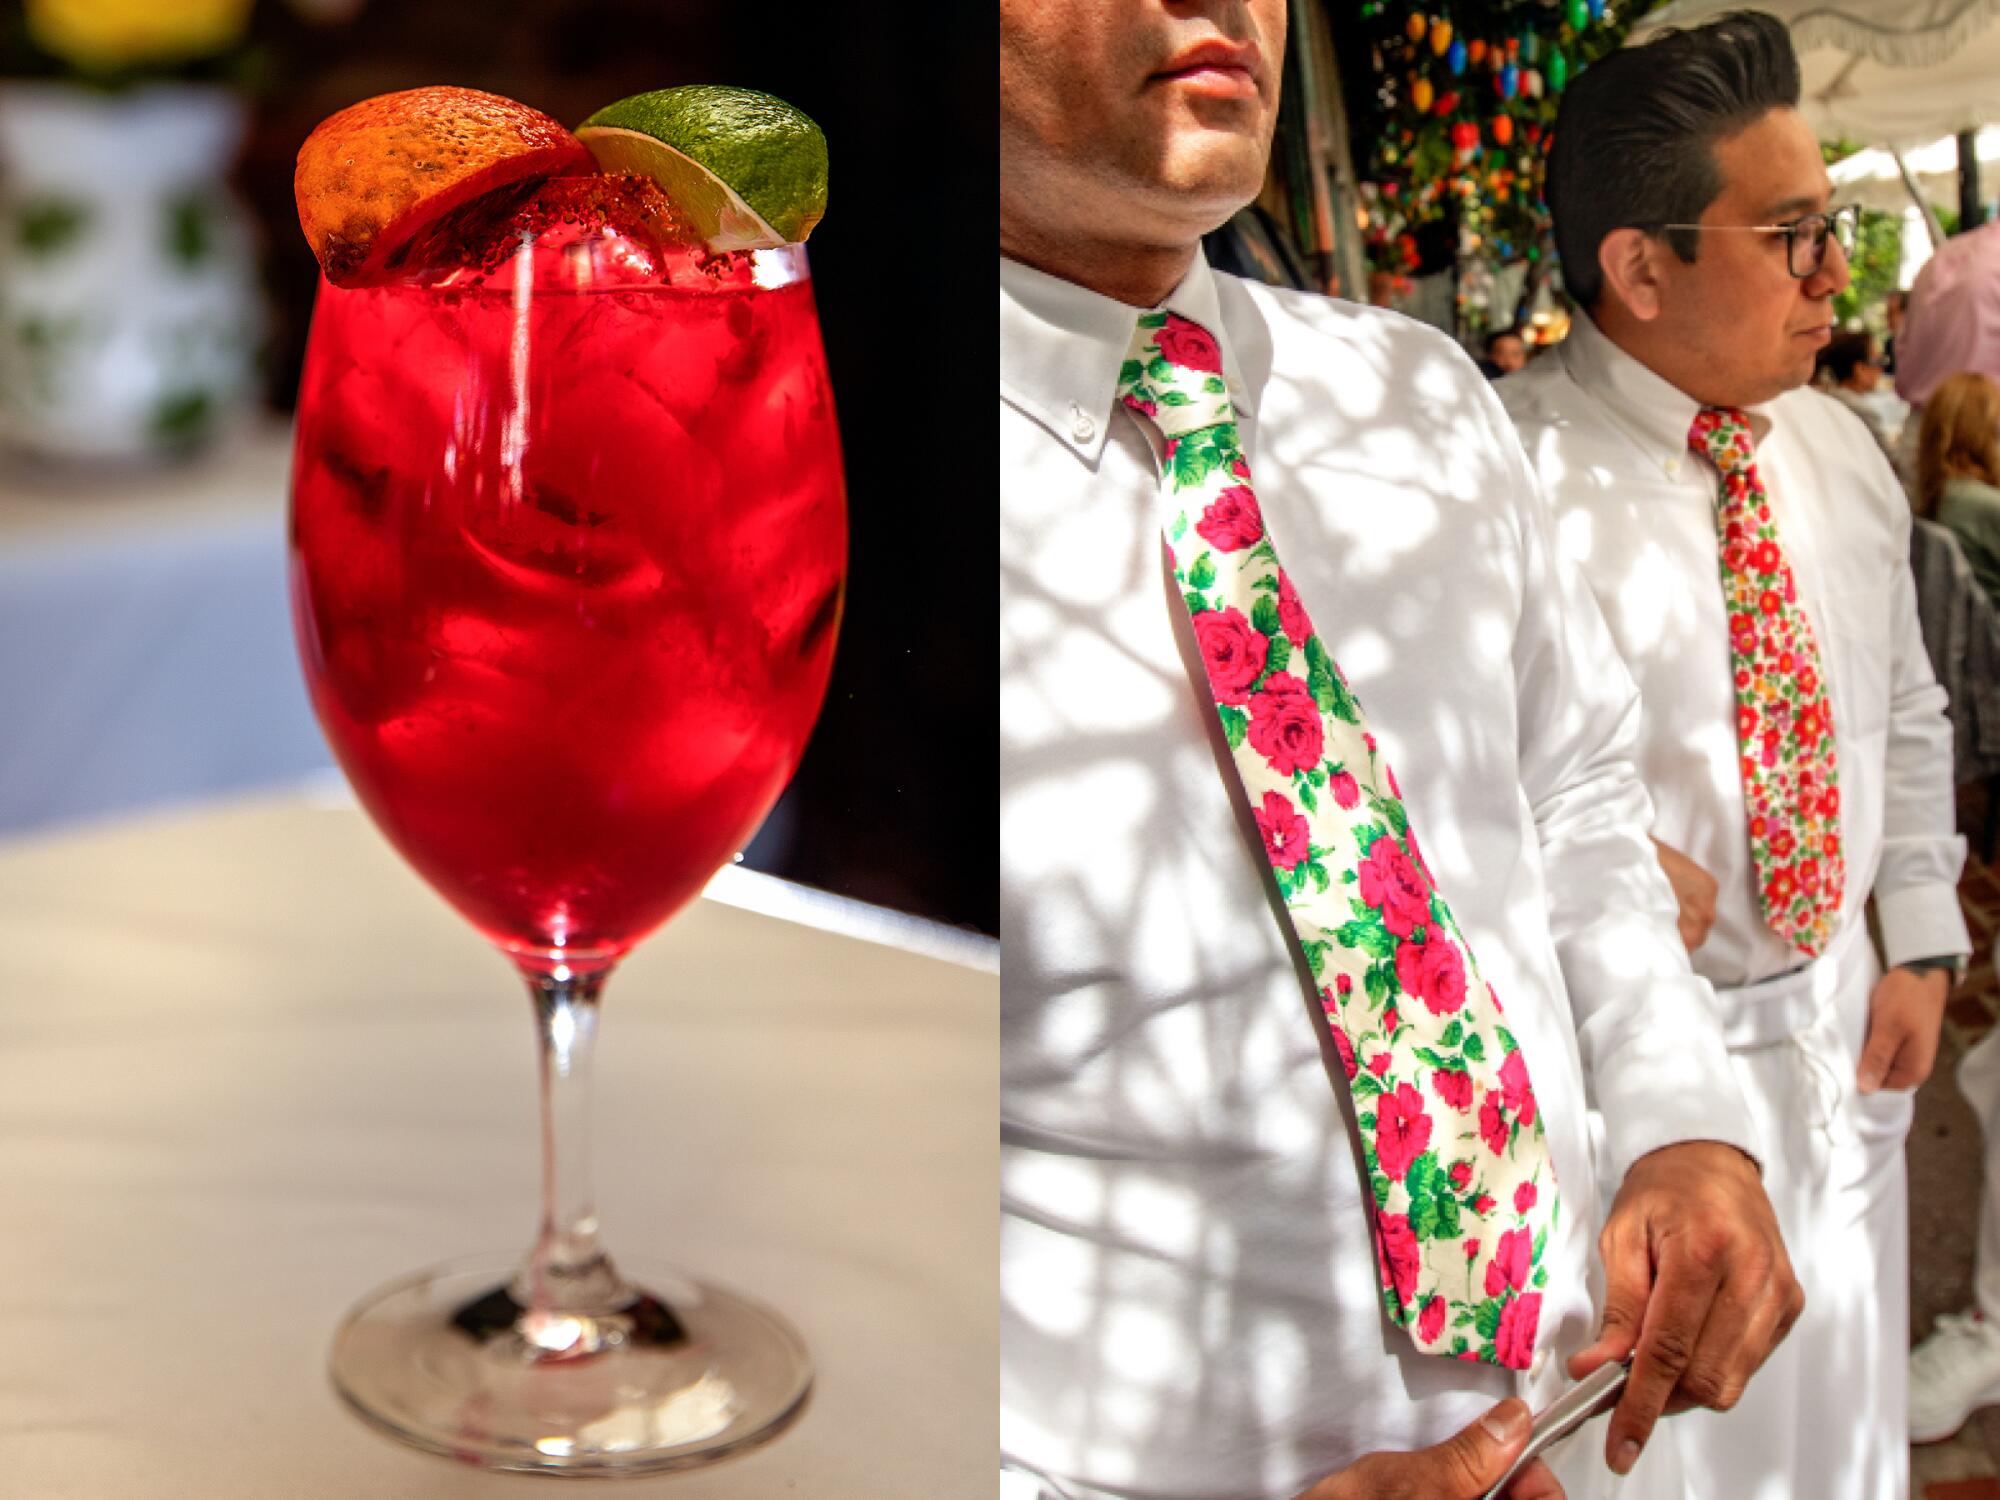 A blood orange margarita, left, and the wait staff's colorful floral neckties, right.